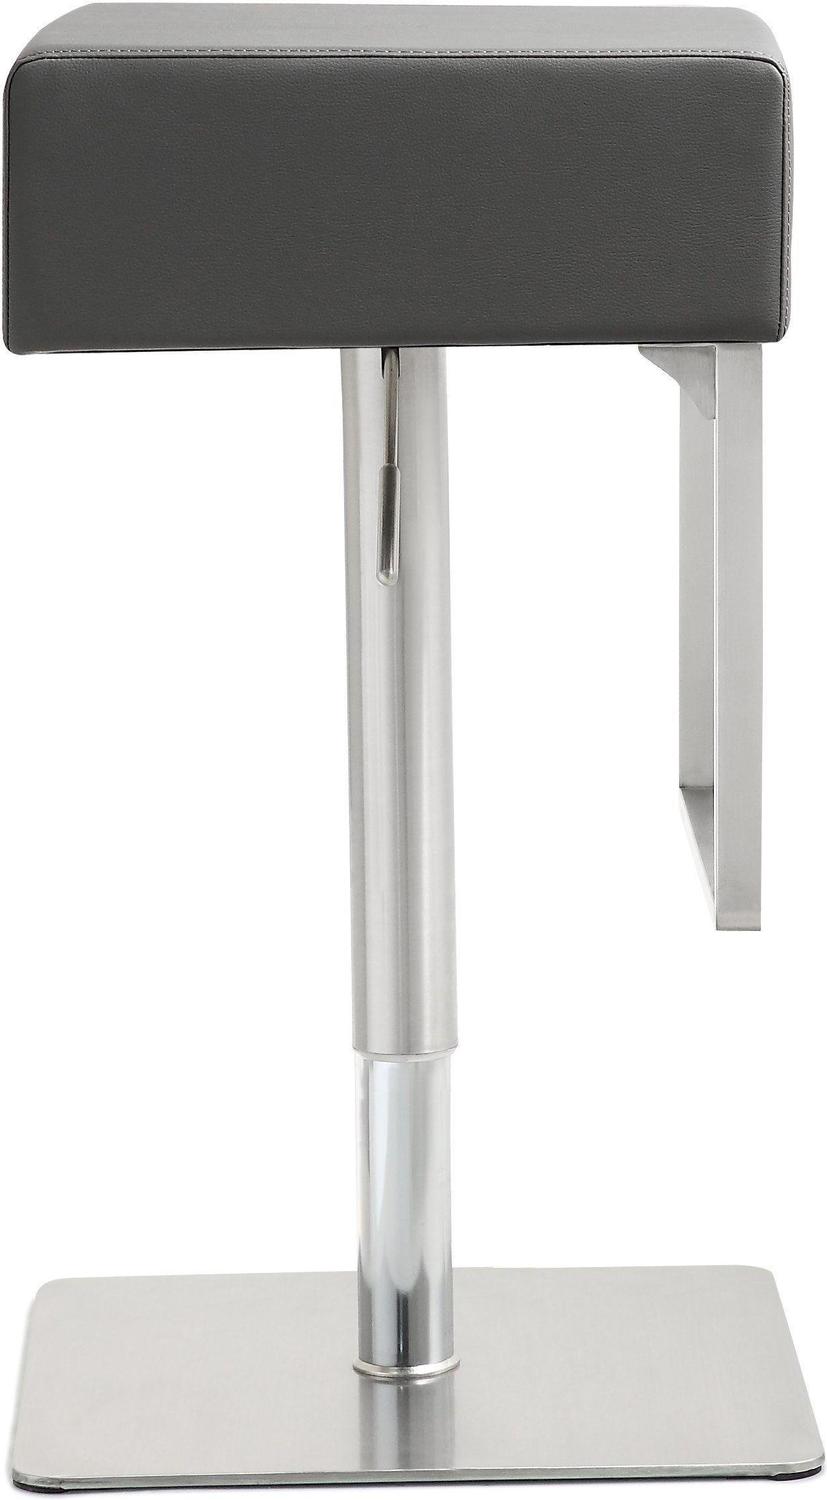 outdoor swivel counter height stools Tov Furniture Stools Grey